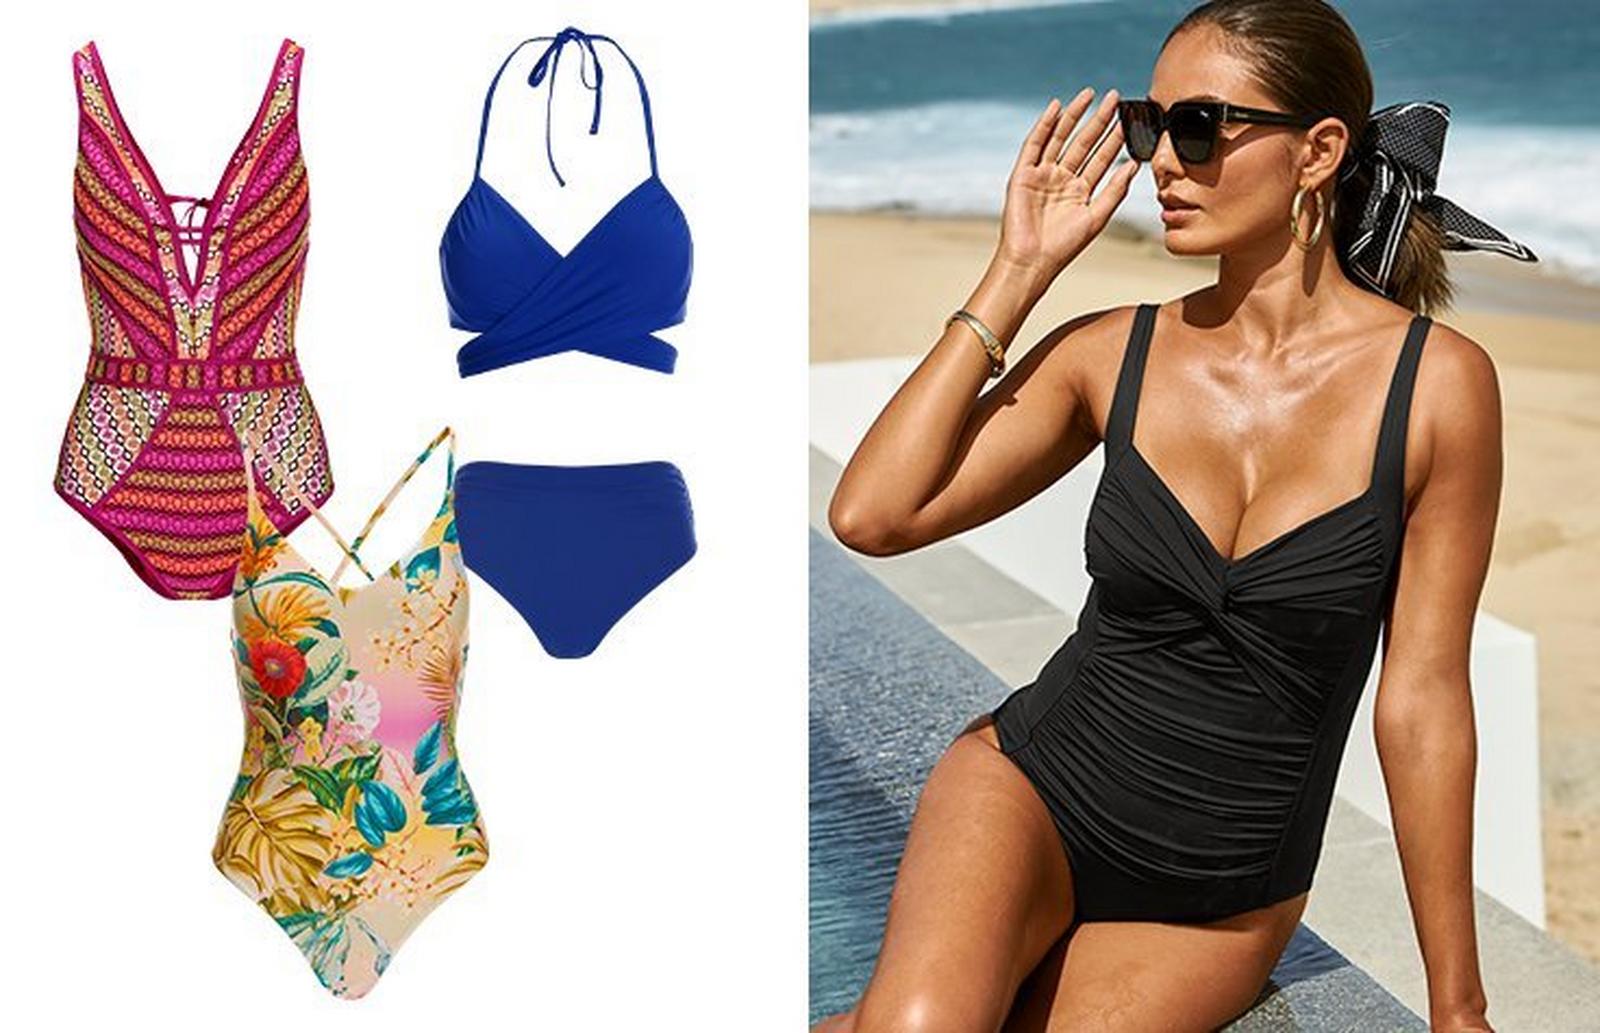 left panel shows a multicolor one-piece crochet swimsuit, navy high-waisted bikini, and floral print multicolor one-piece swimsuit. right model wearing a black ruched one-piece swimsuit, sunglasses, and gold hoop earrings.